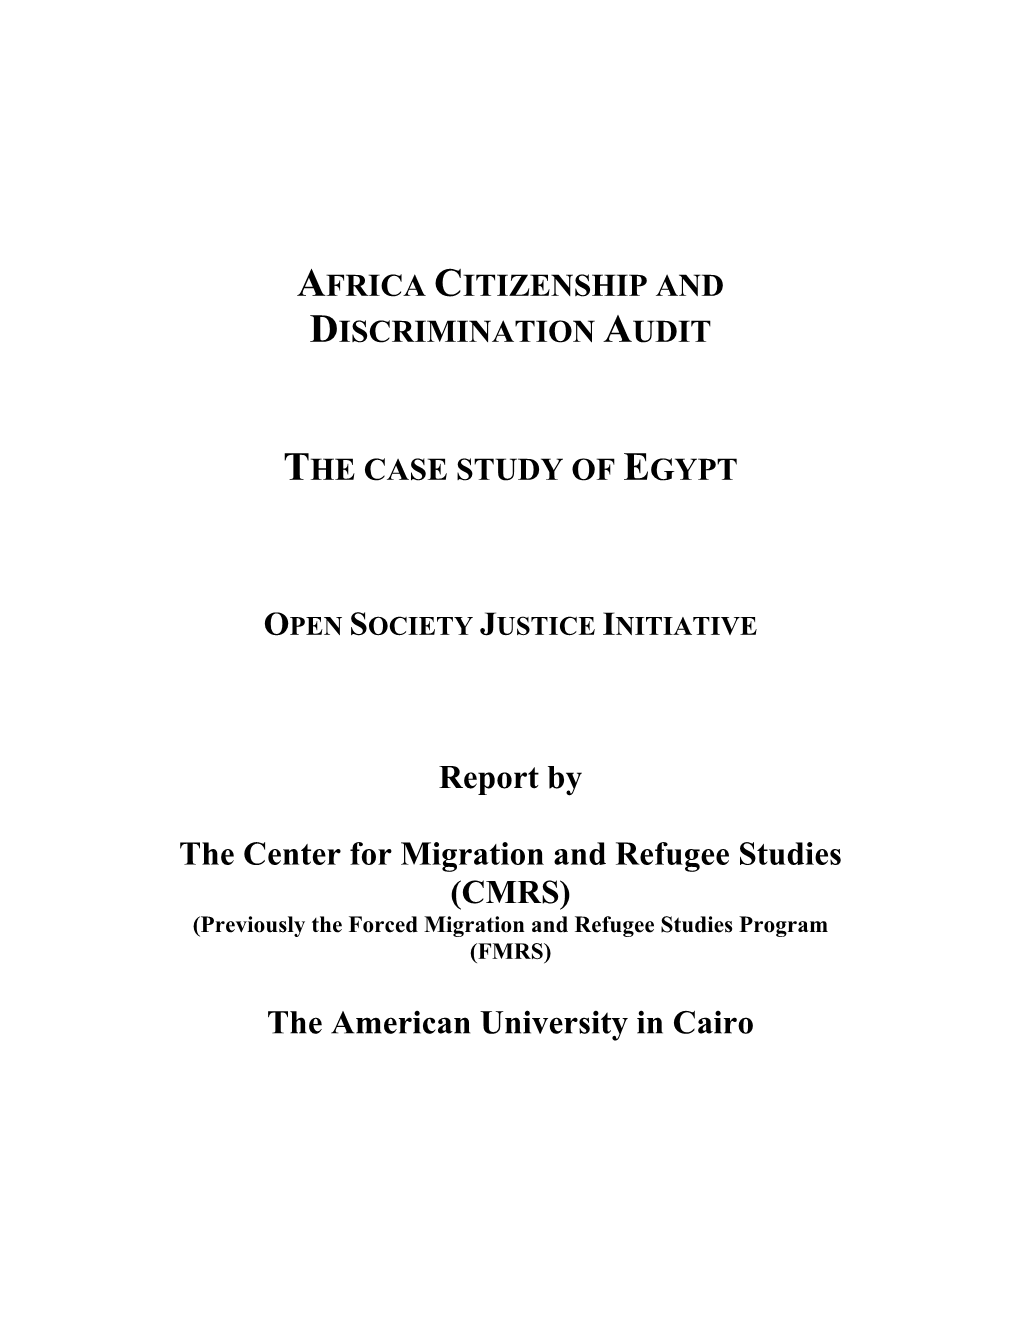 Africa Citizenship and Discrimination Audit the Case Study of Egypt